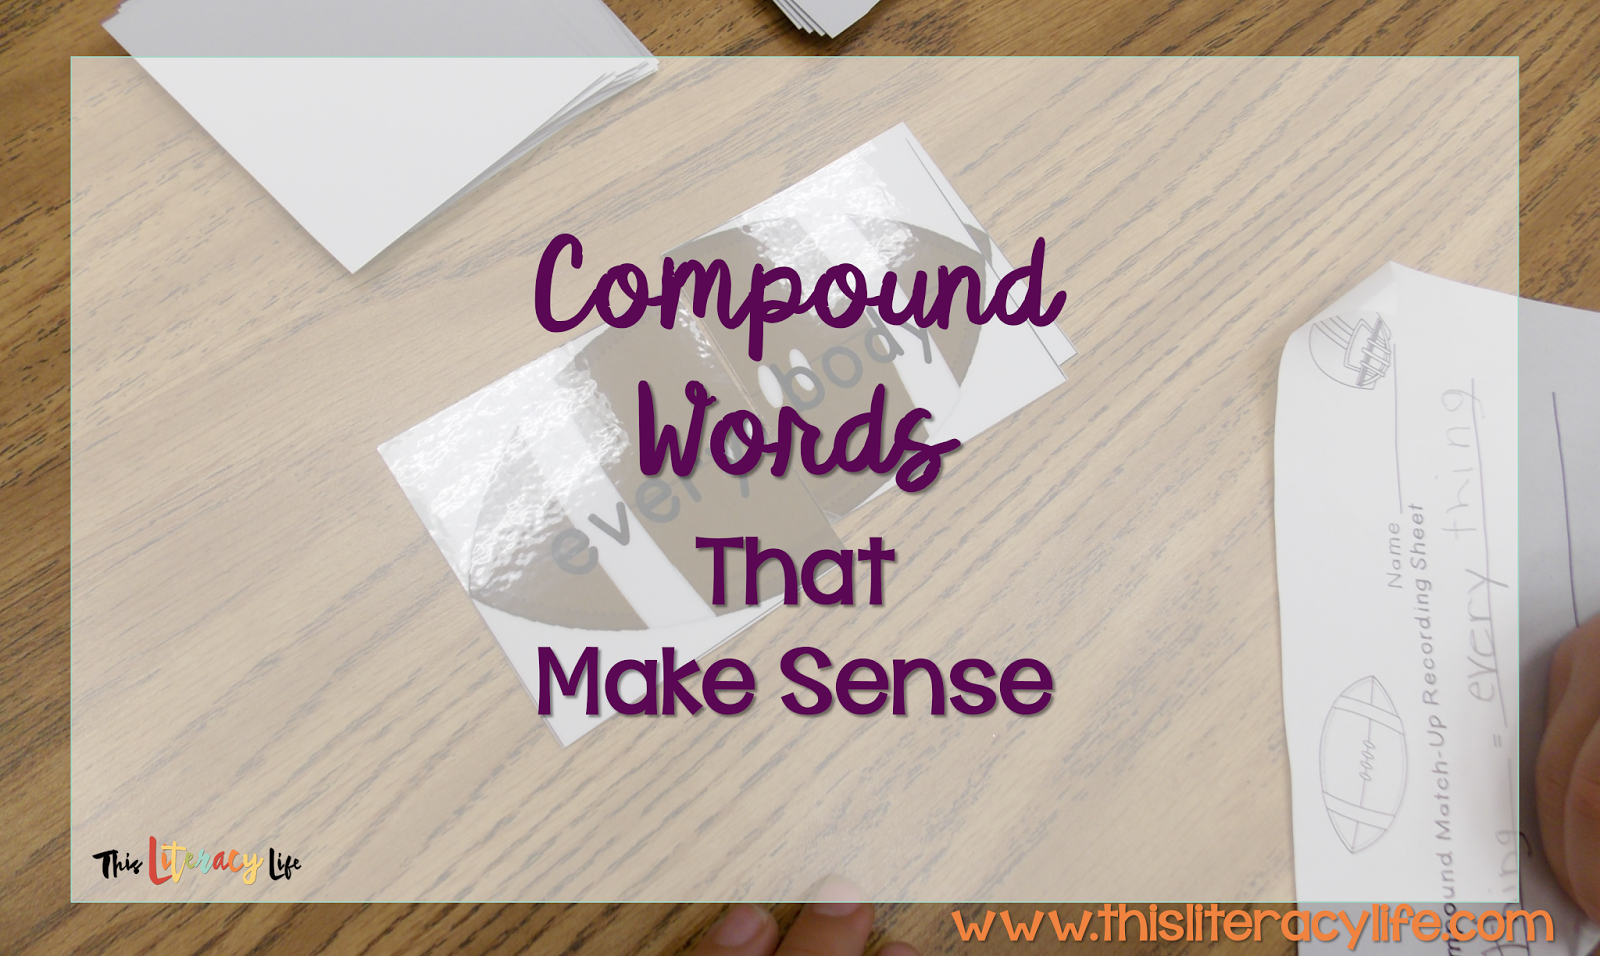 Using games to work with compound words makes it more exciting for our students. These fast paced games keep them asking for more while practicing making and reading words.